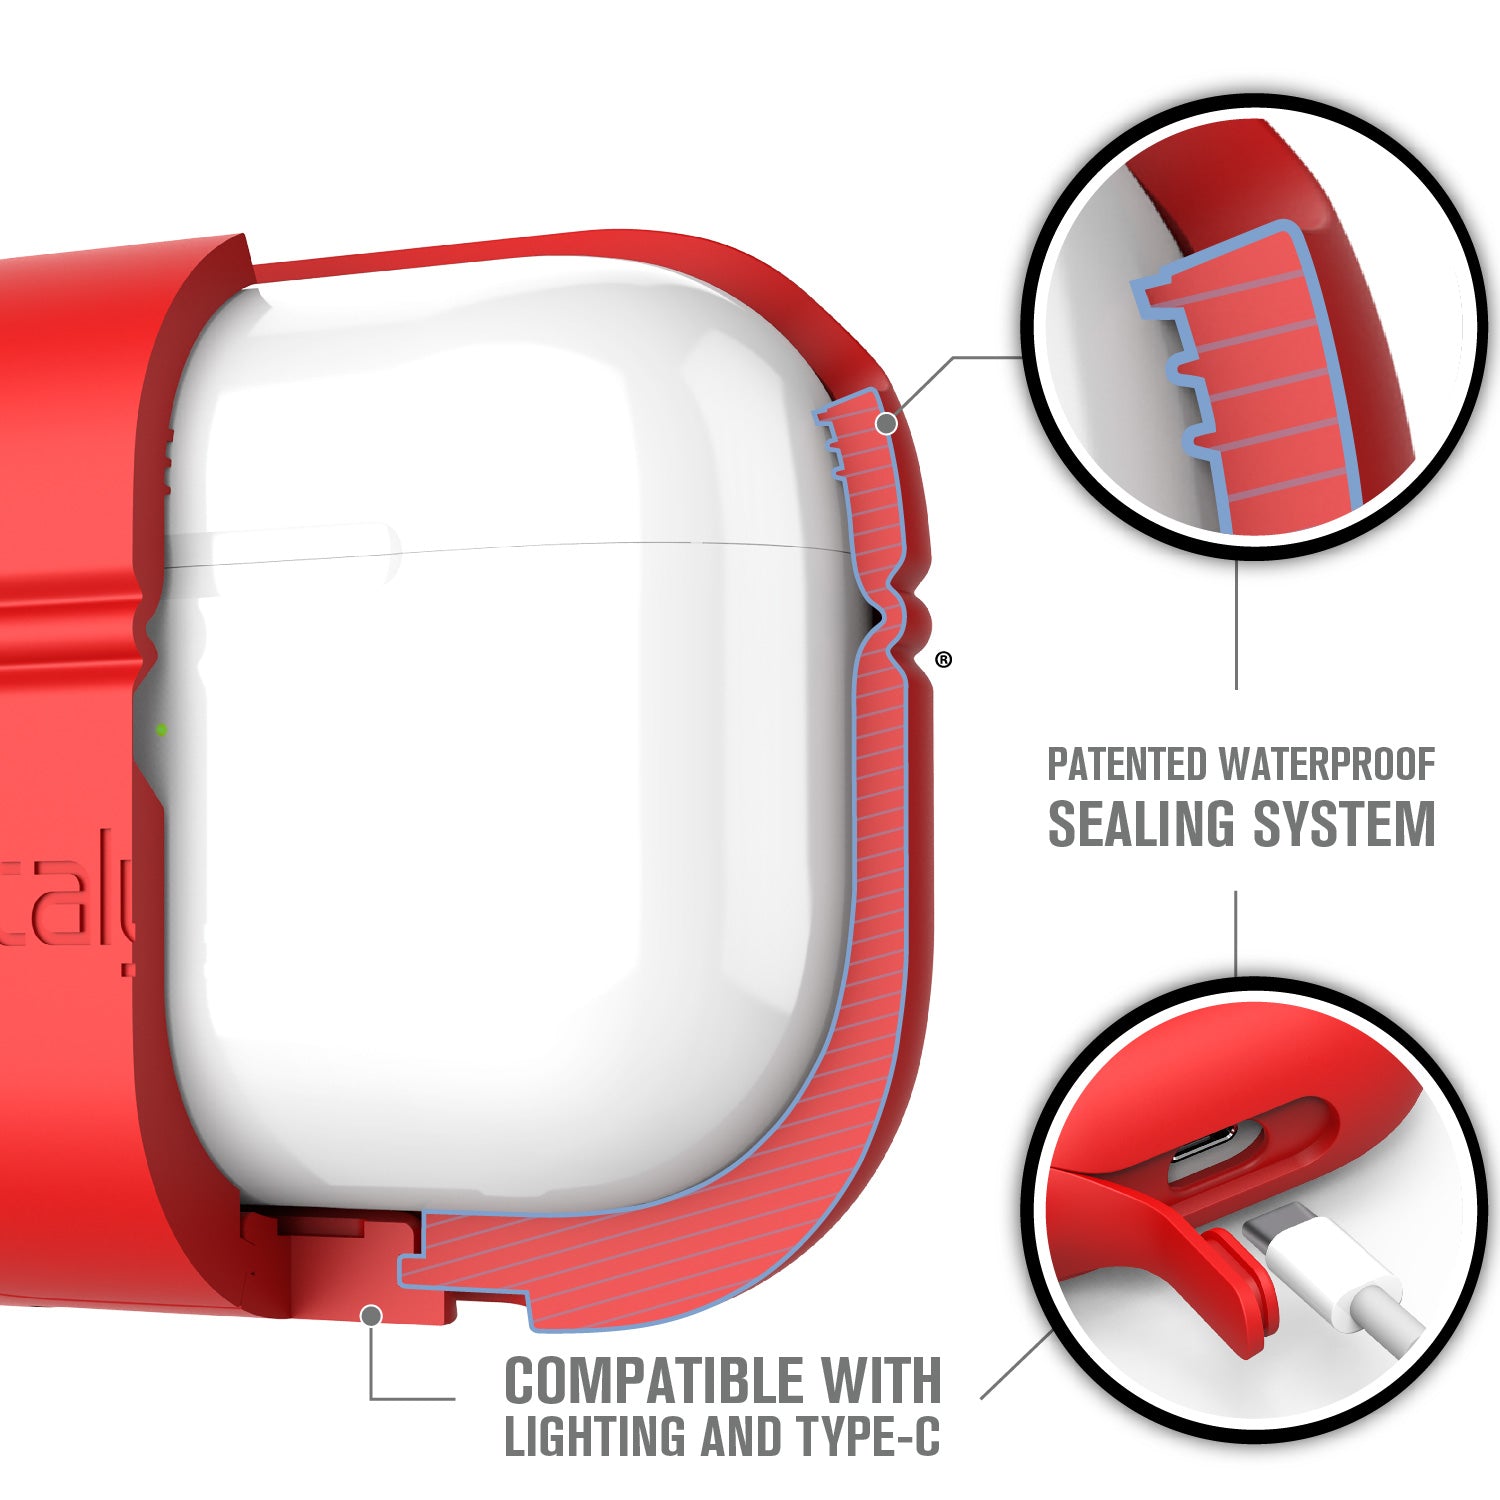 CATAPLAPDPRORED | catalyst airpods pro gen 2 1 waterproof case carabiner special edition red showing the patented waterproof sealing system texts reads patented waterproof sealing system compatible with lightning and type c